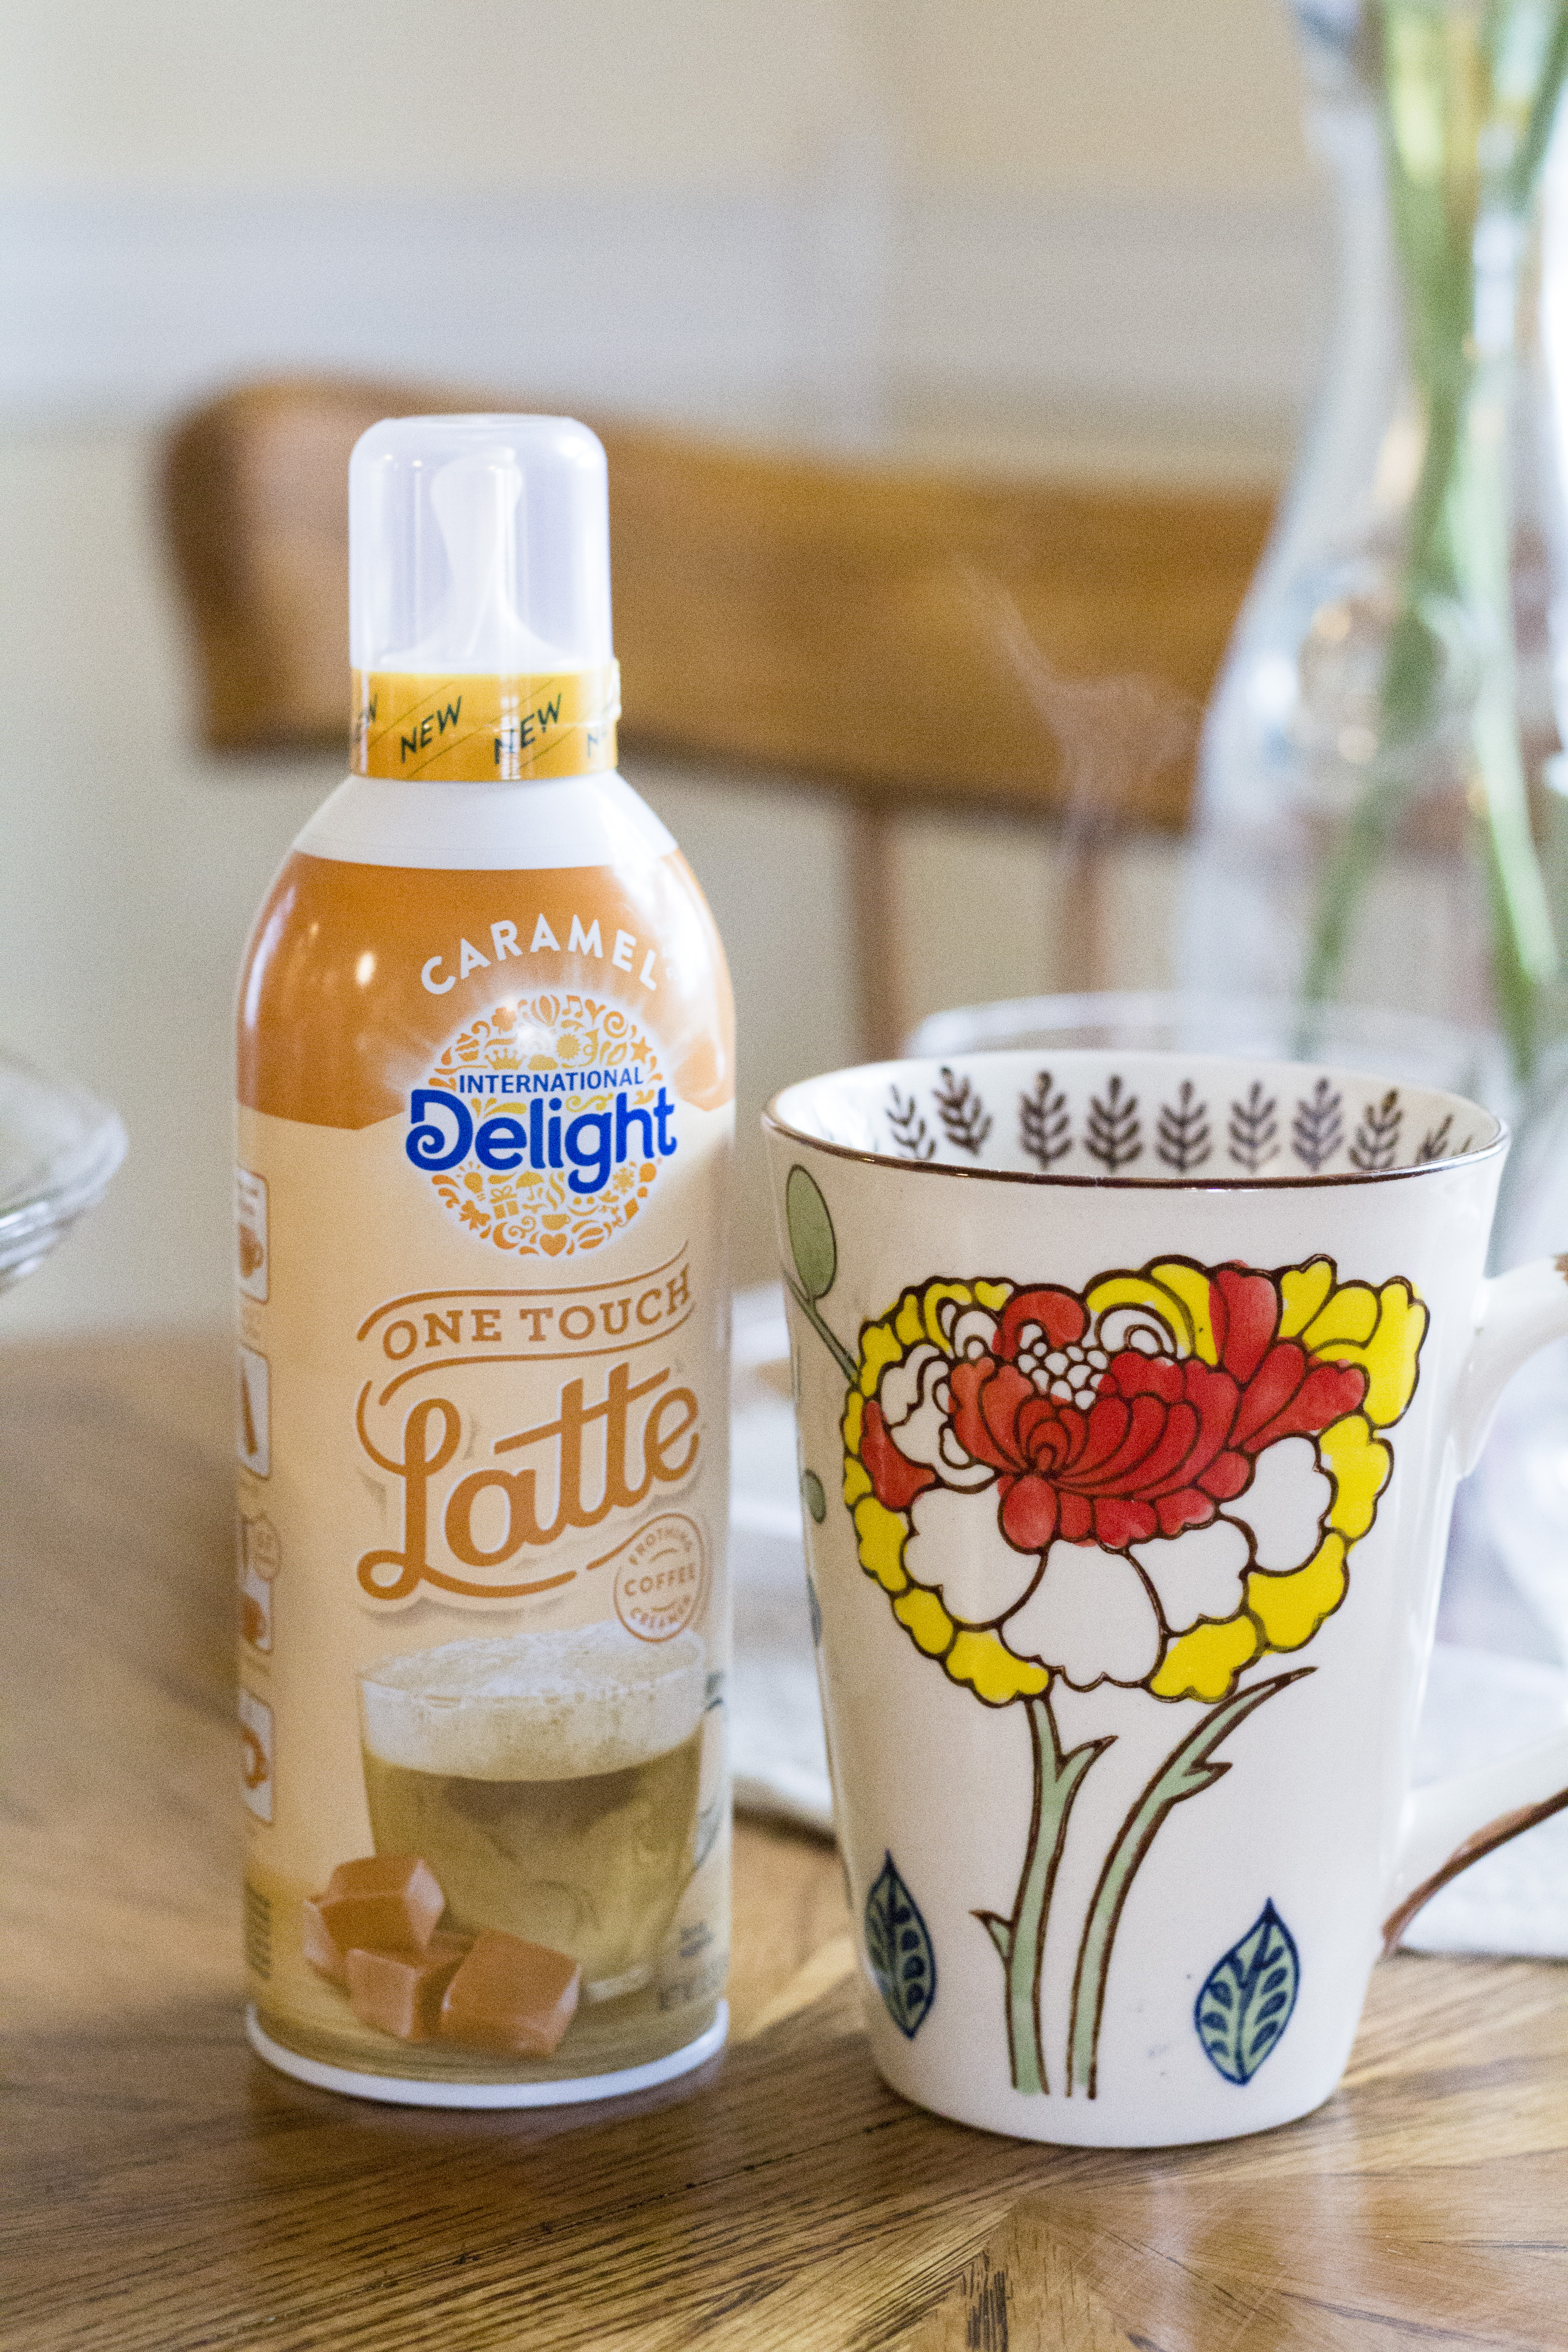 International Delight One Touch Latte First Impression